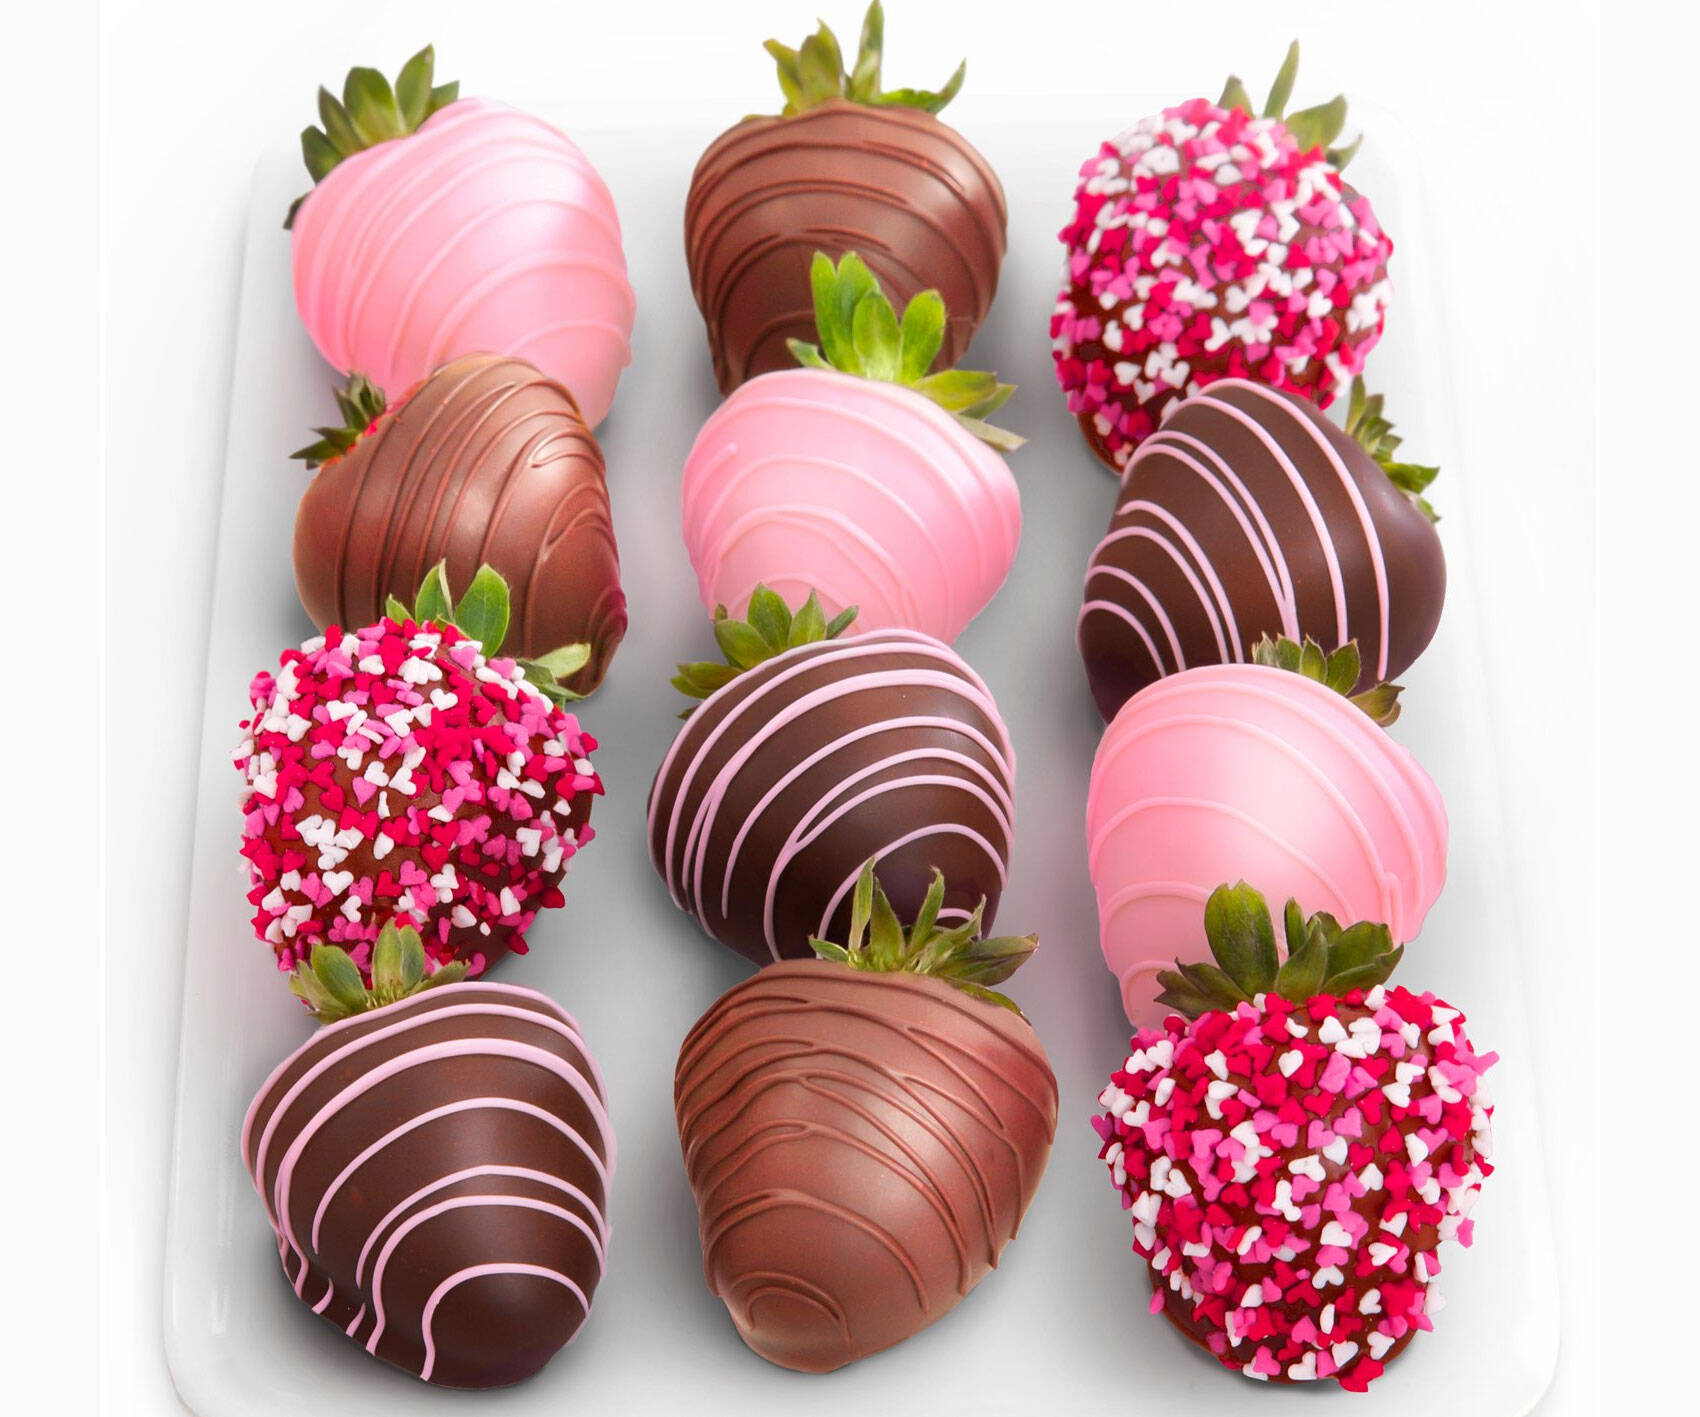 Chocolate Covered Strawberries - //coolthings.us